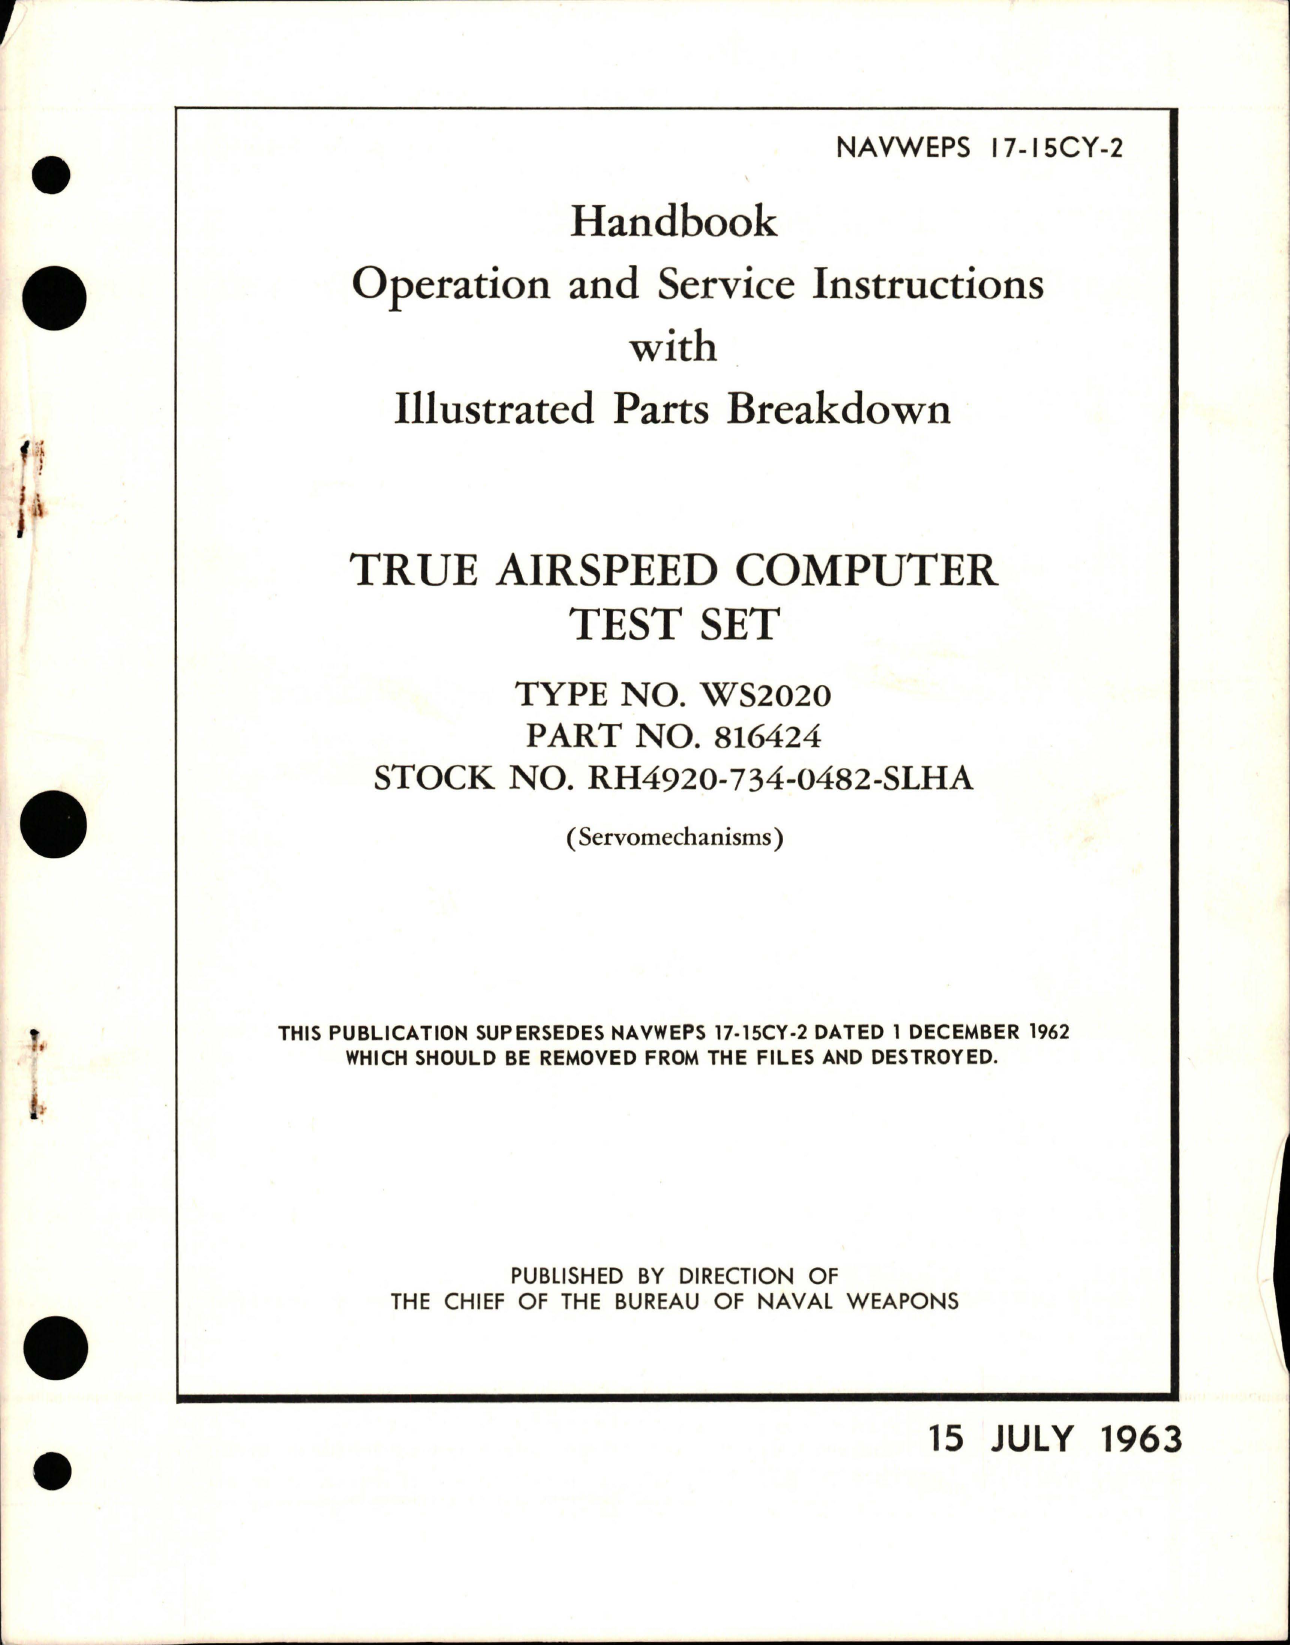 Sample page 1 from AirCorps Library document: Operation, Service Instructions with Illustrated Parts Breakdown for True Airspeed Computer Test Set - Type WS2020, Part 816424